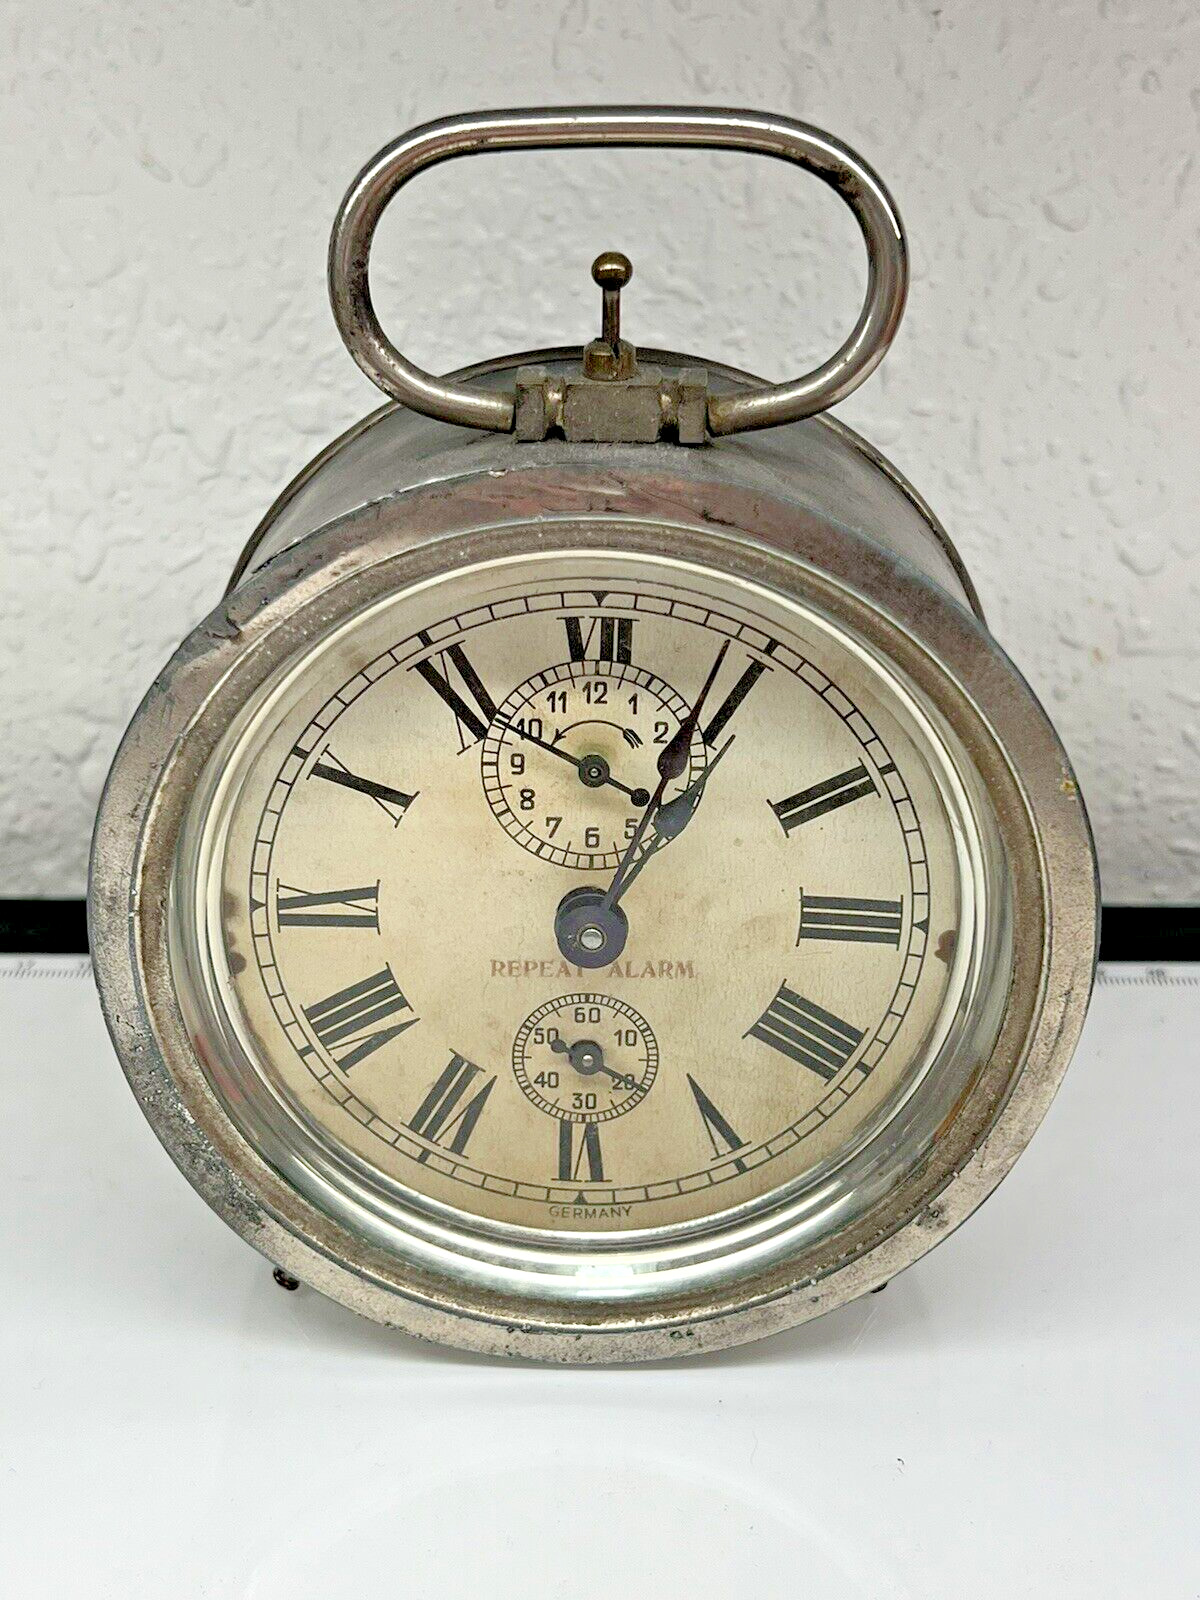 OLD ANTIQUE GERMAN ALARM CLOCK GERMANY ROMAN NUMERALS BEVELED GLASS JUNGHANS?